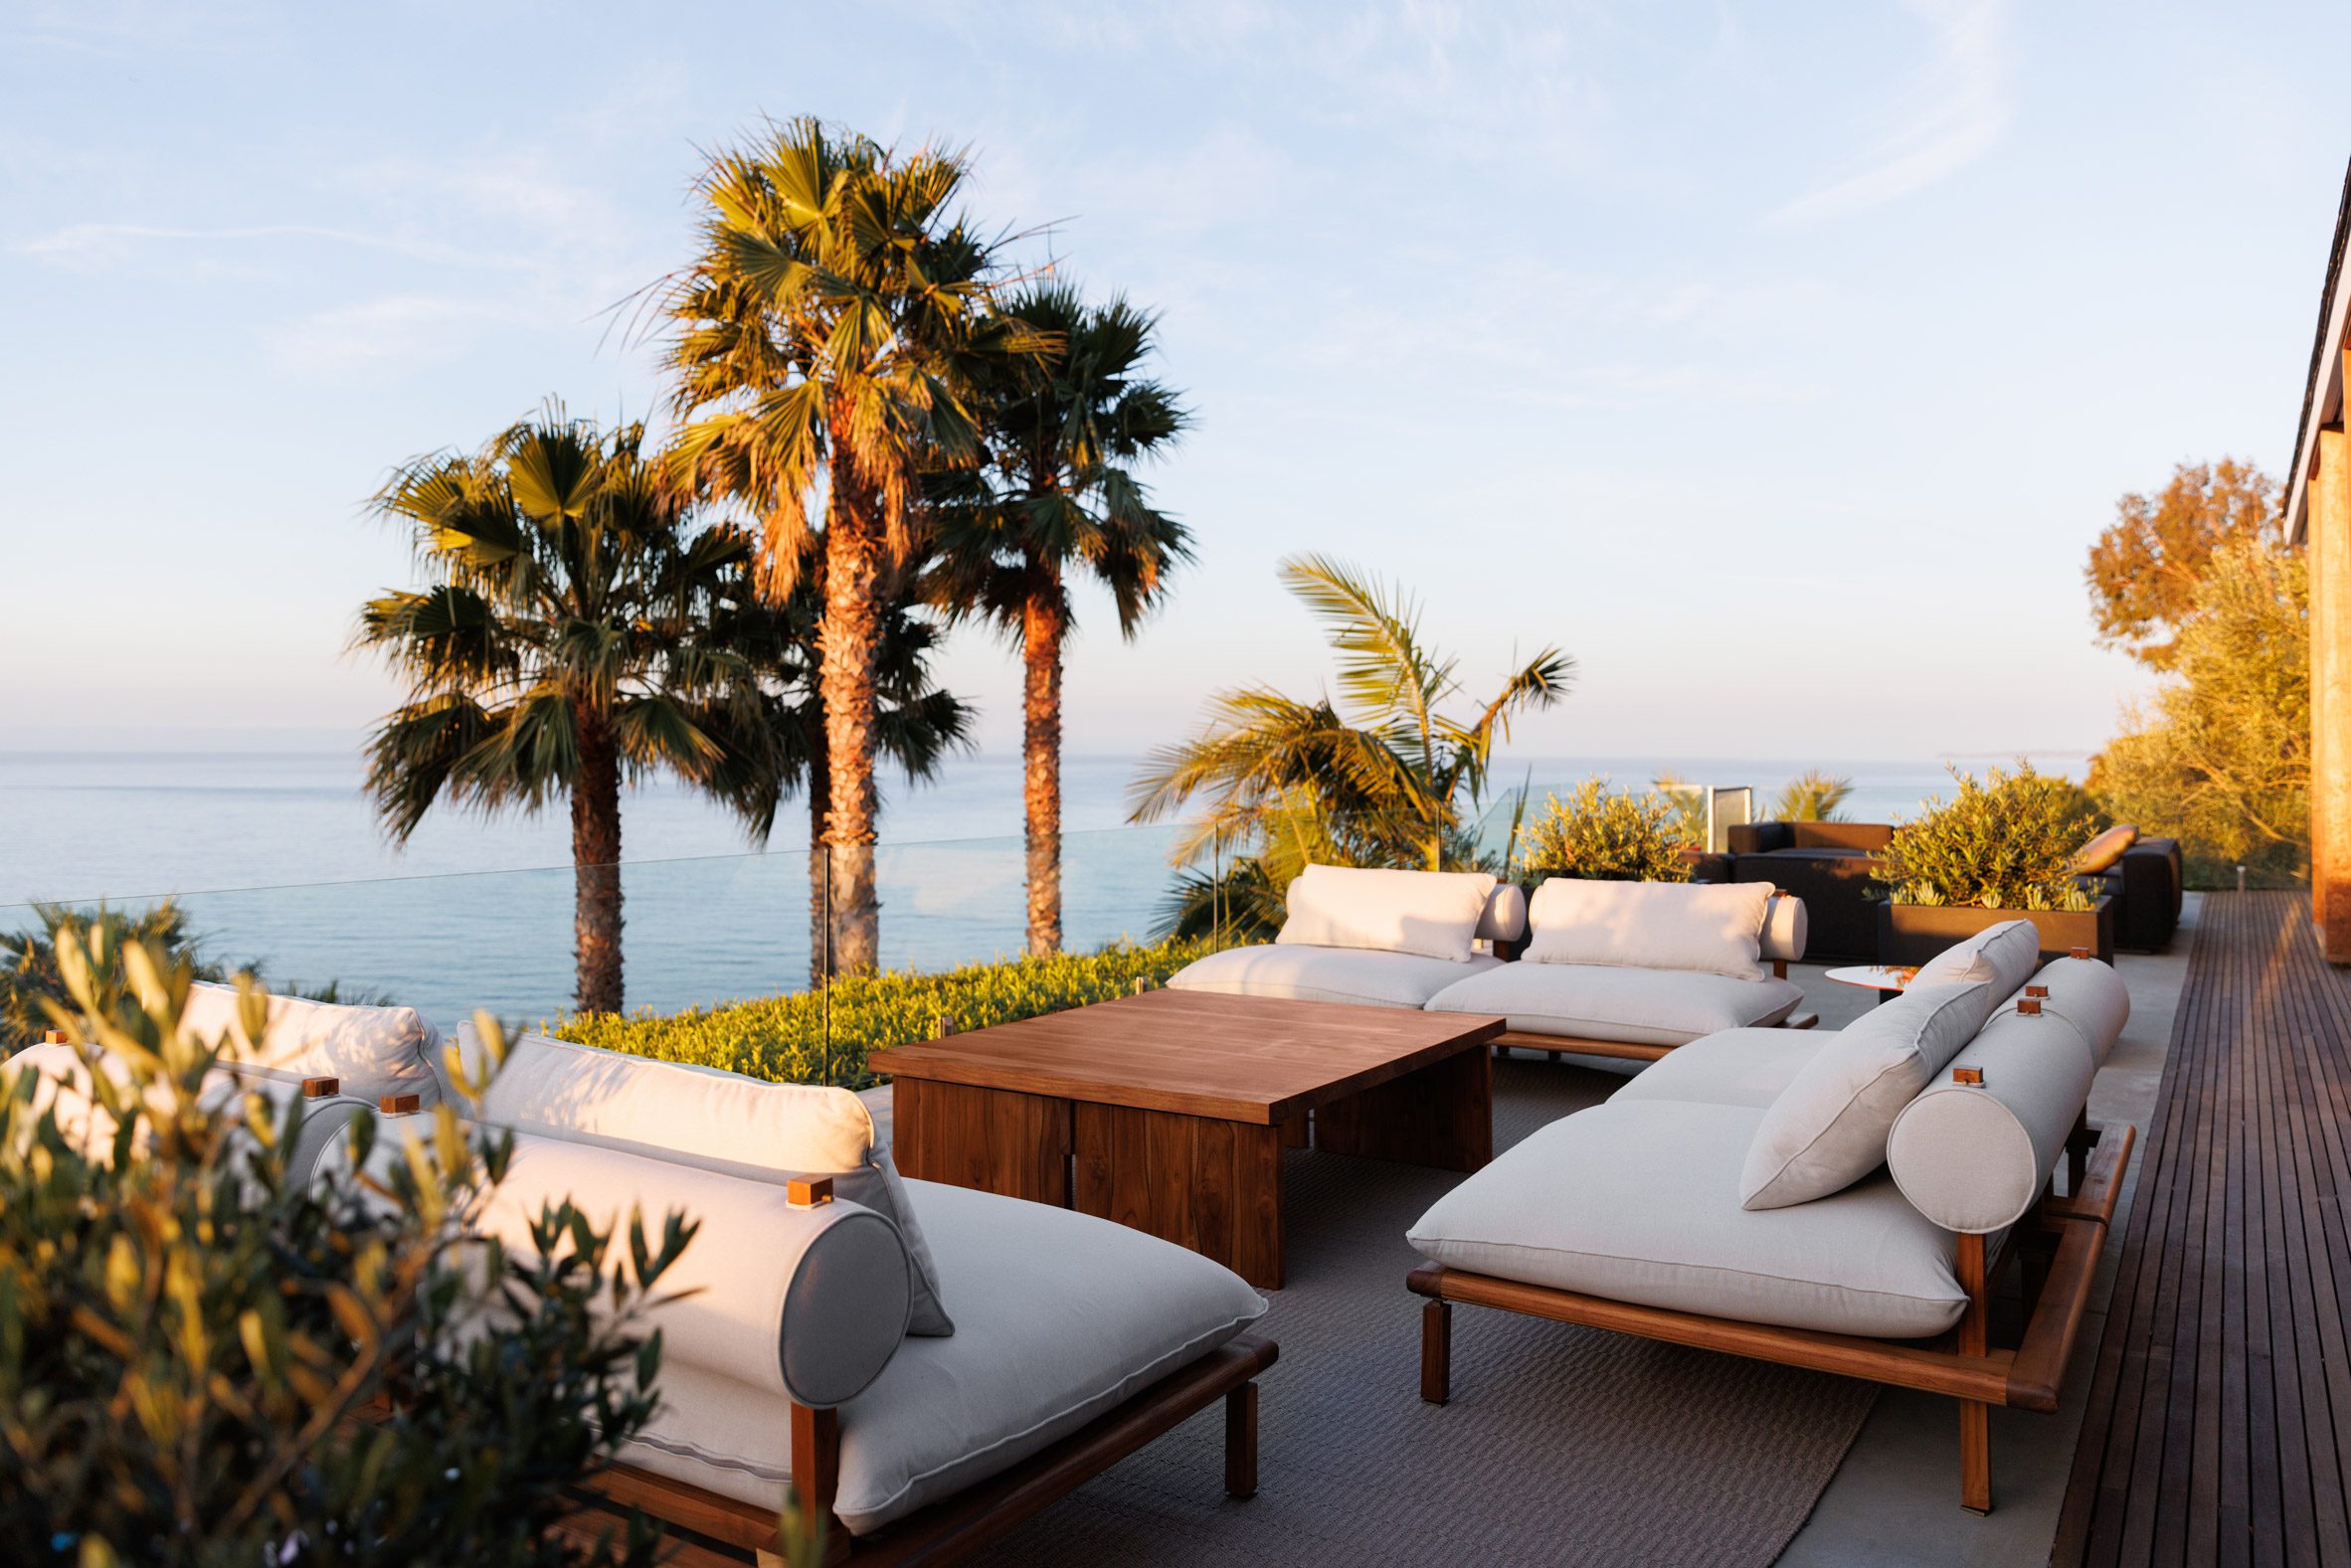 Terrace with soft seating and palm trees in the background